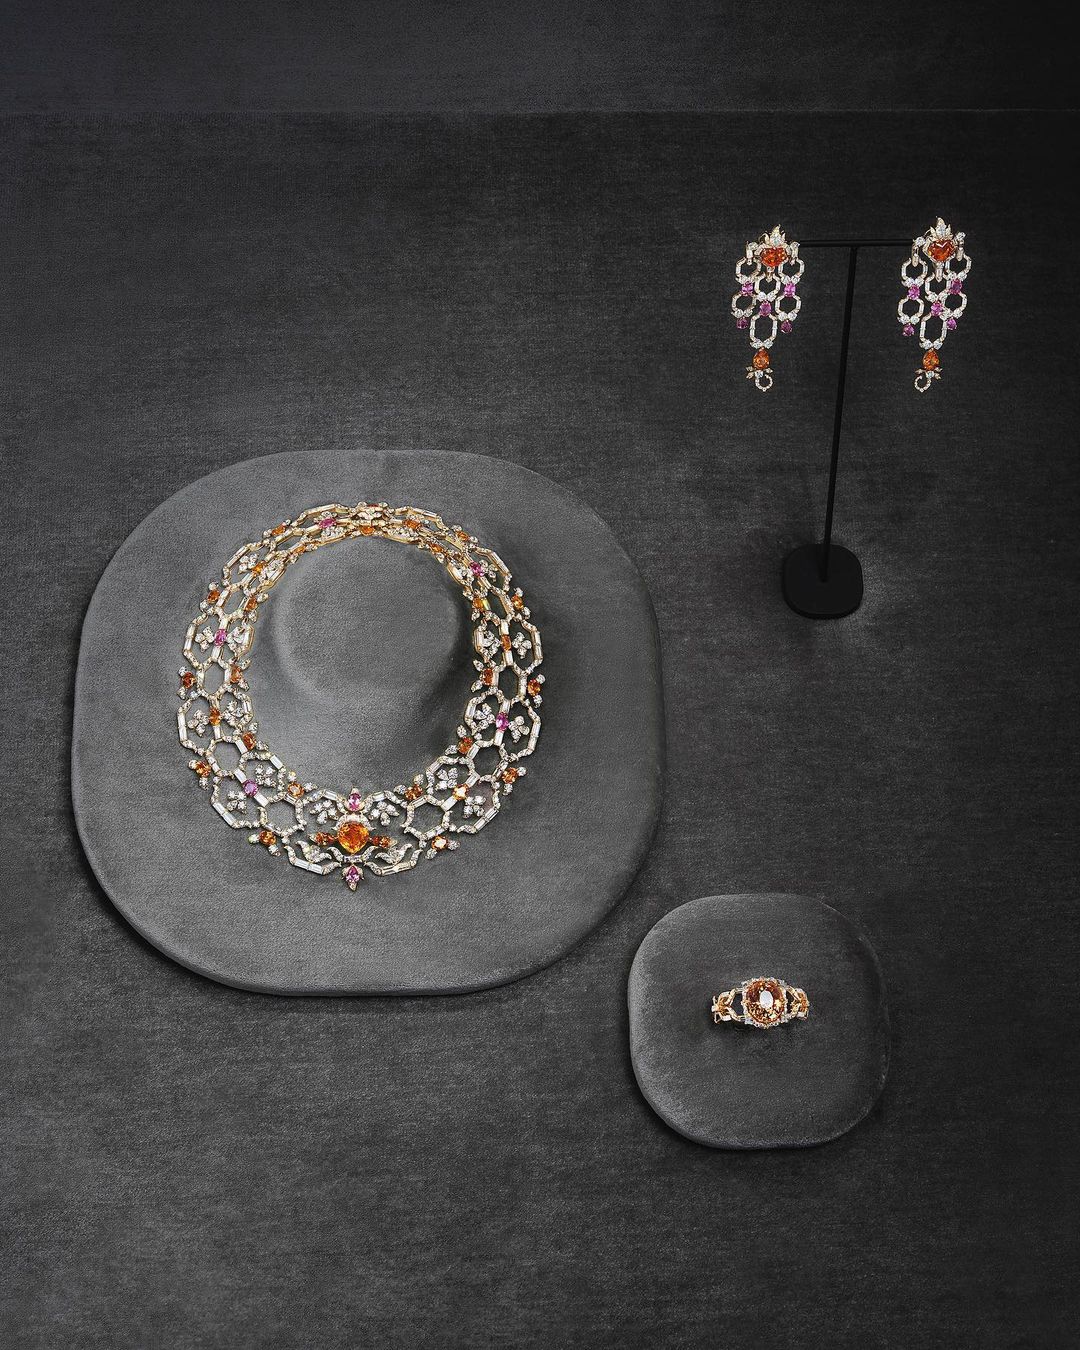 Gucci's Latest High Jewelry Collection Celebrates the Four Seasons